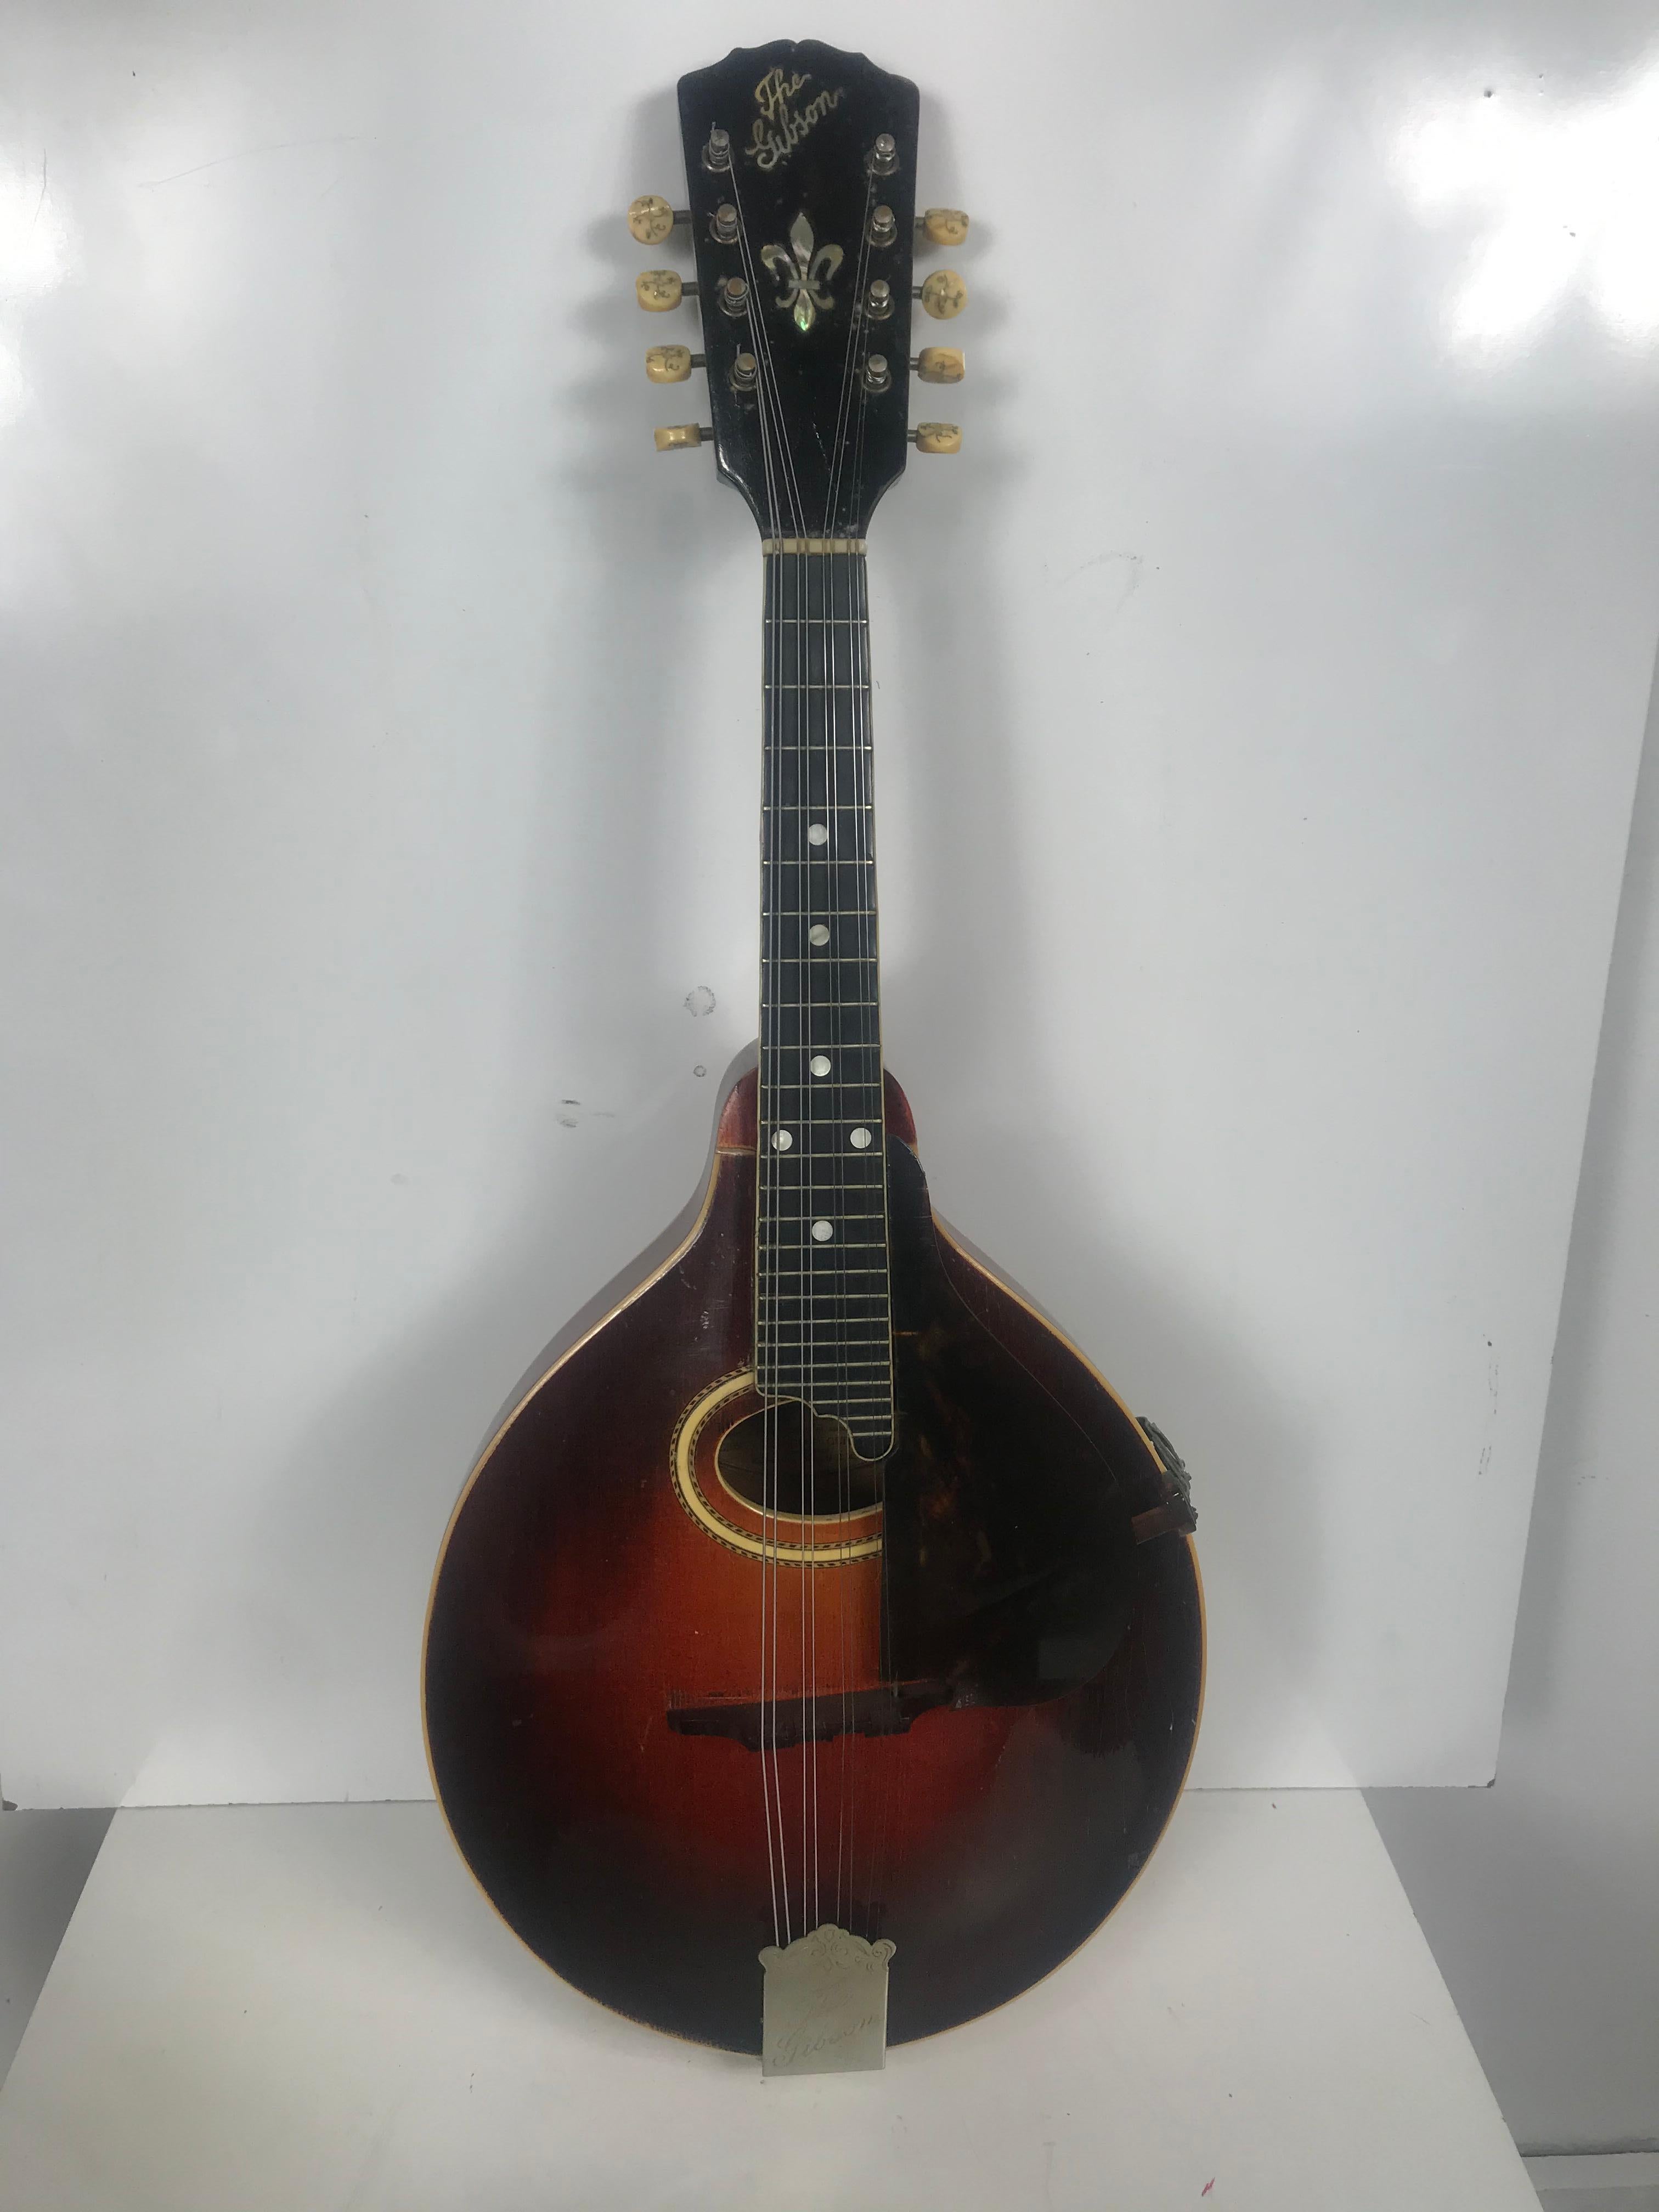 Antique Gibson circa 1917 A-4 Mandolin Sunburst.
This 1917 pumpkin top Gibson A-4 model mandolin is one of the nicest examples you’ll find. The old shellac finish is entirely original and in great shape. All original parts. Birch back and sides,